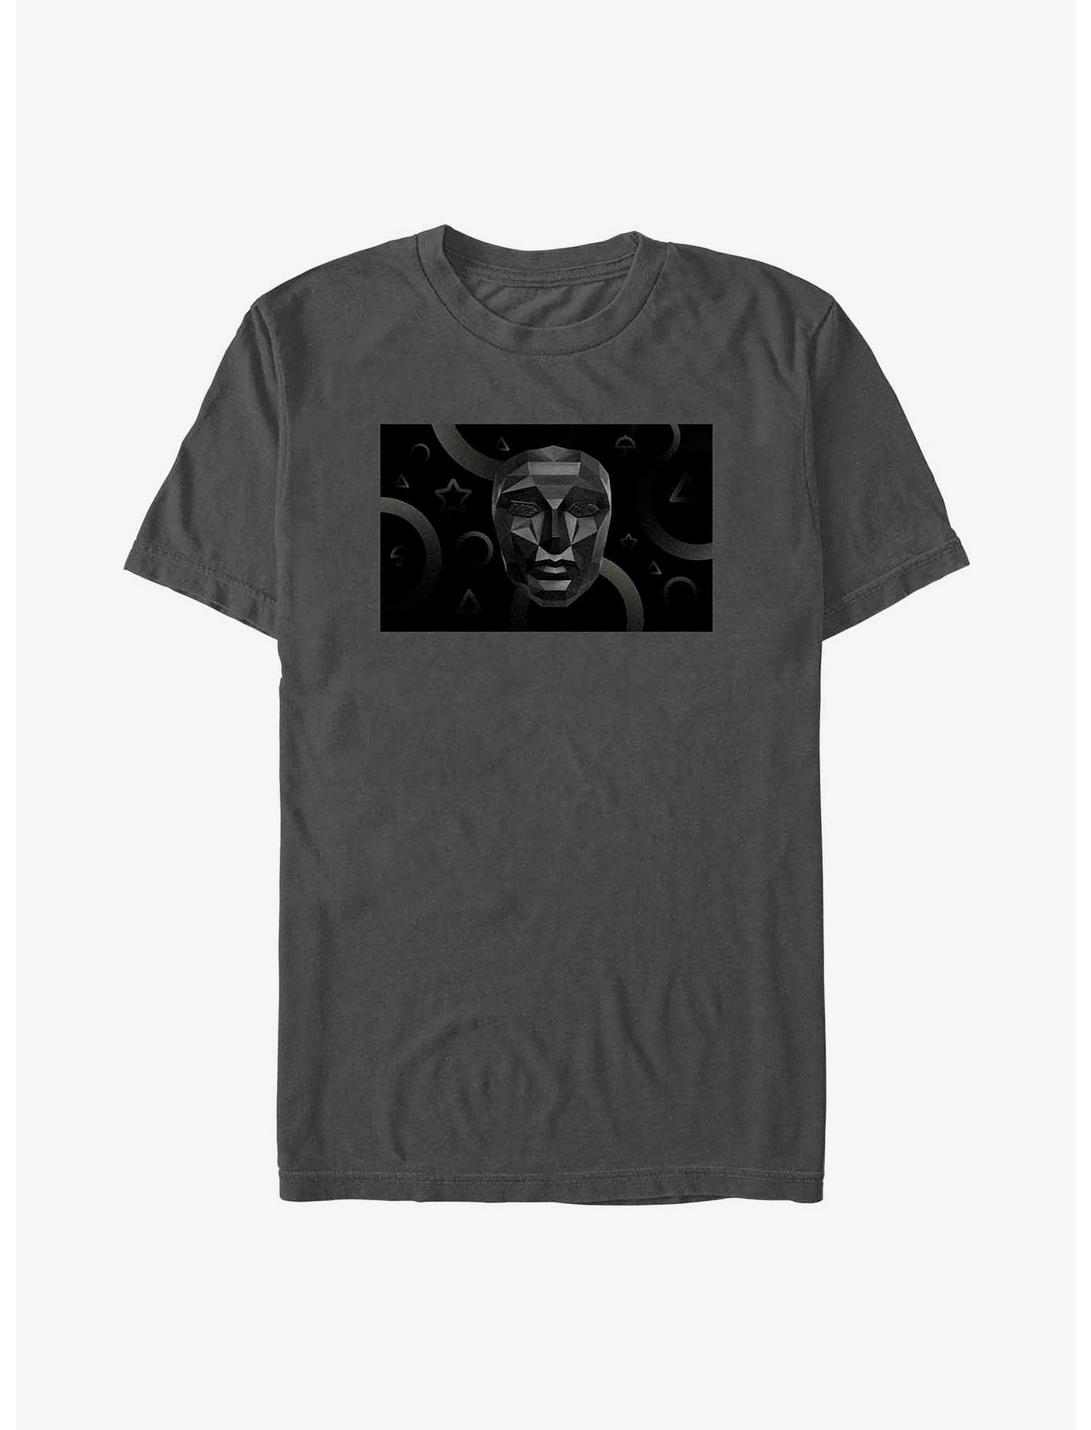 Squid Game Mask And Shapes T-Shirt, CHARCOAL, hi-res